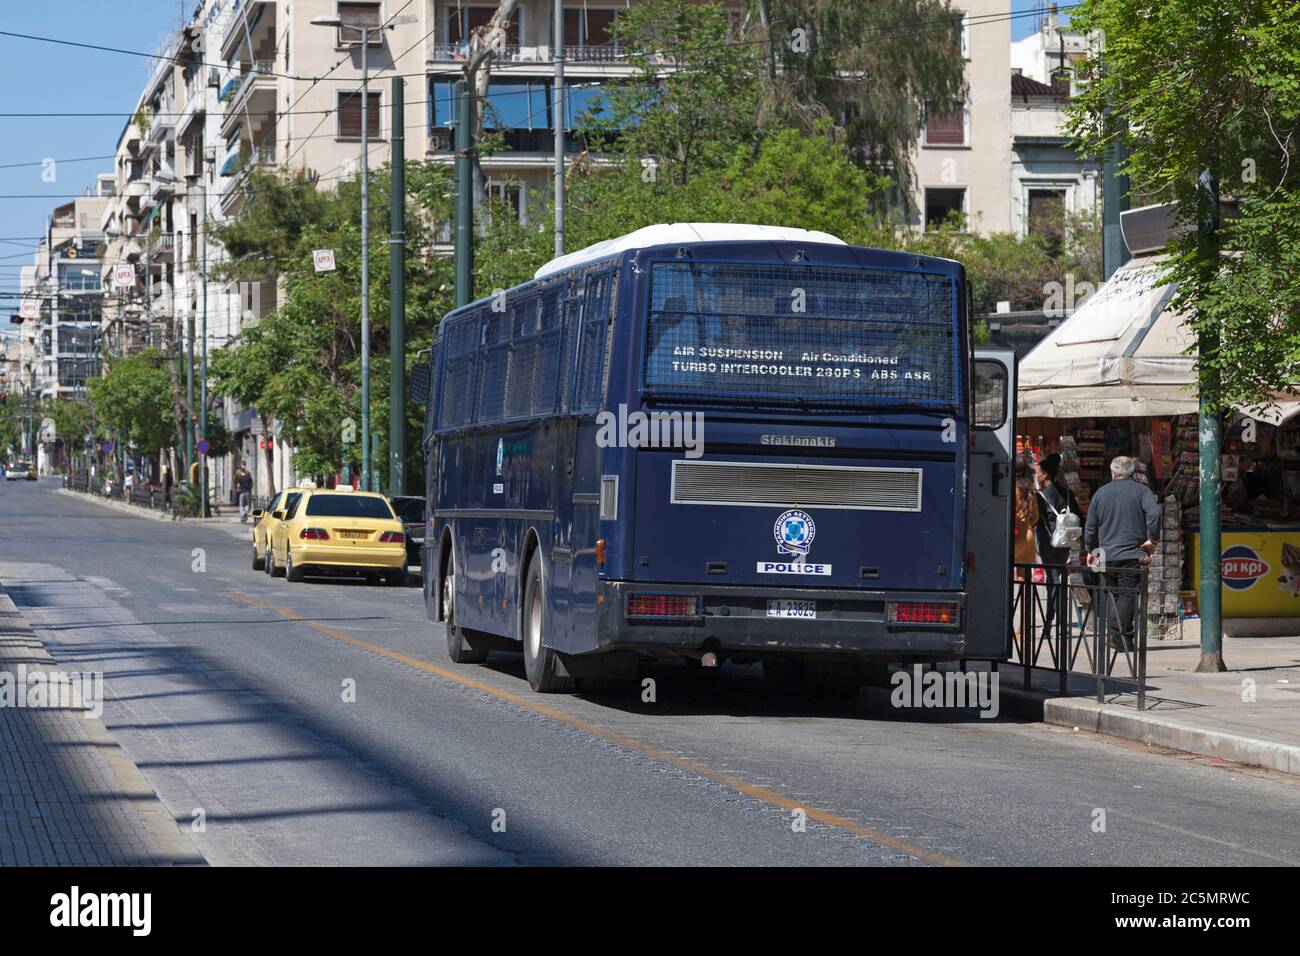 Athens, Greece - April 29 2019: Bus of the Hellenic Police parked near a town square in the city center. Stock Photo